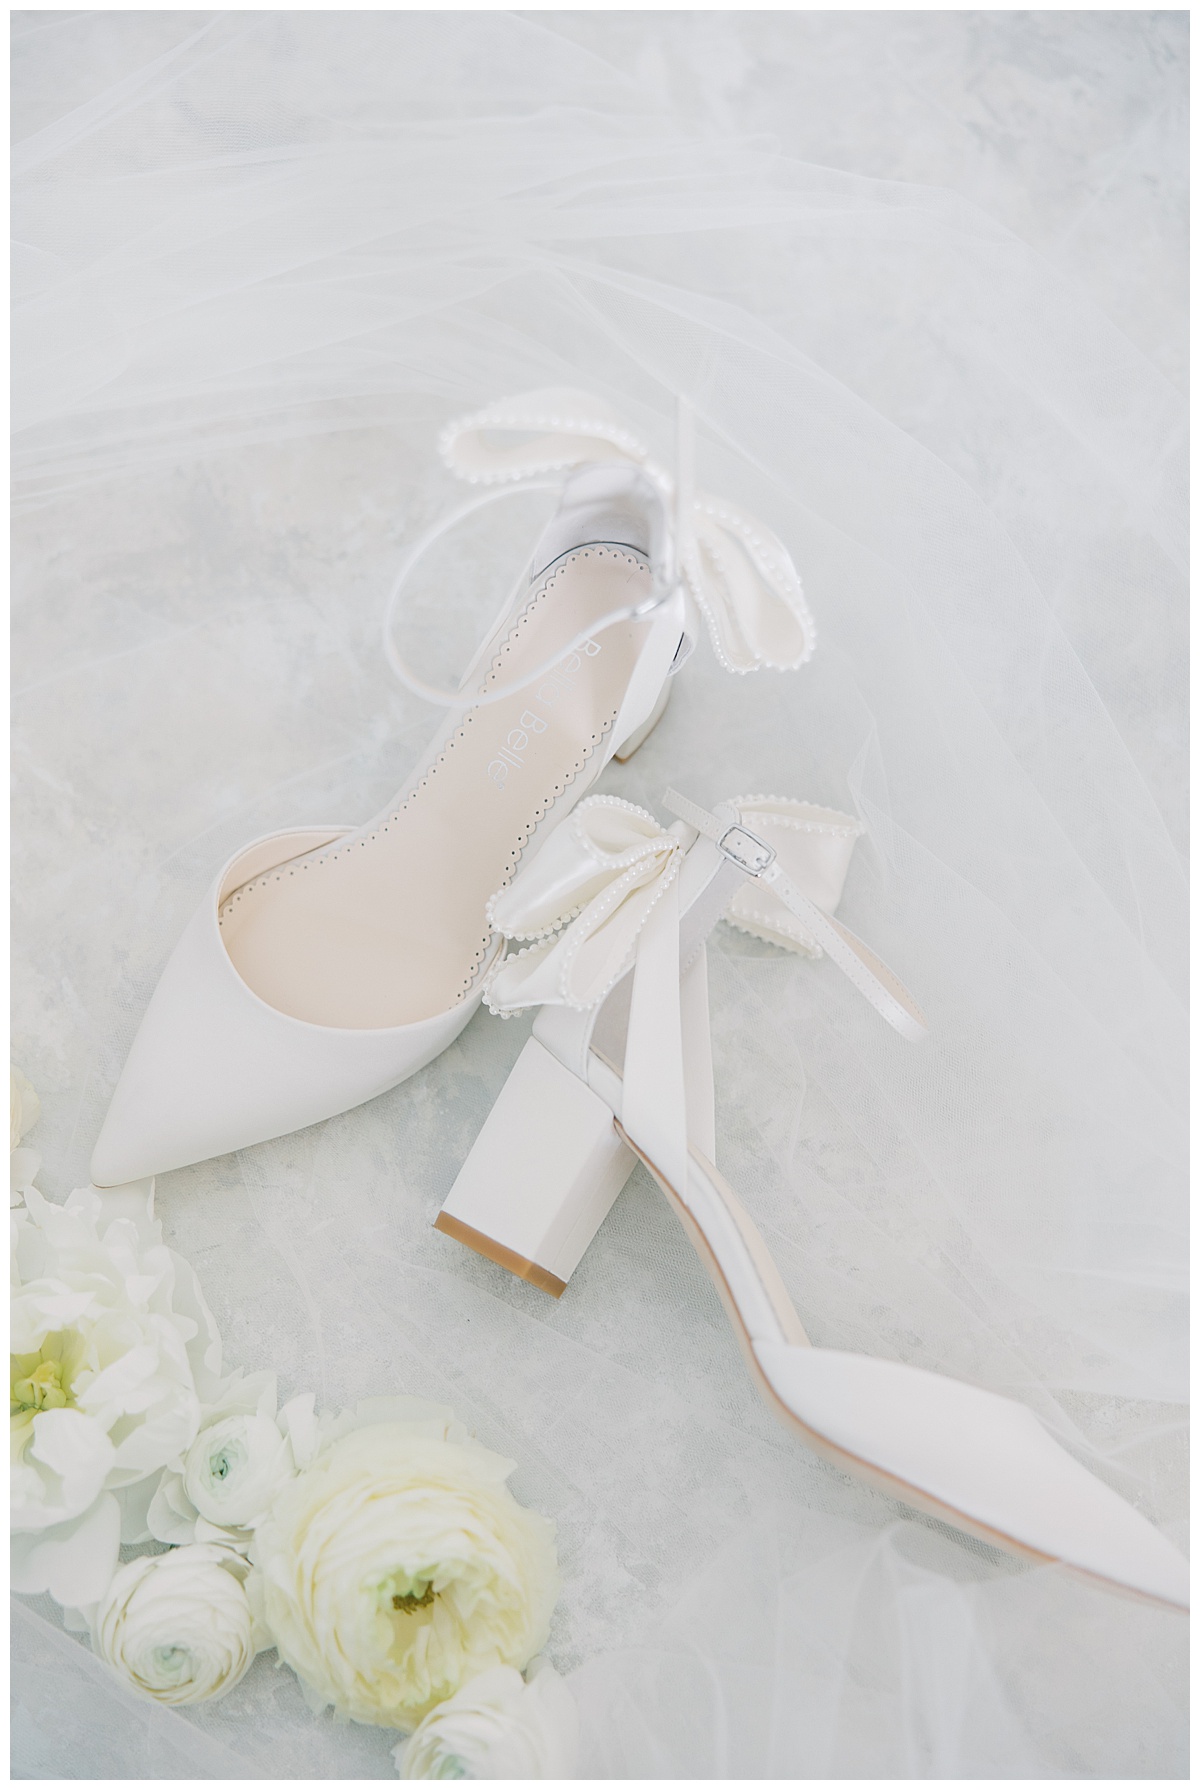 ivory bridal shoes with toe and a block heel by Bella belle 